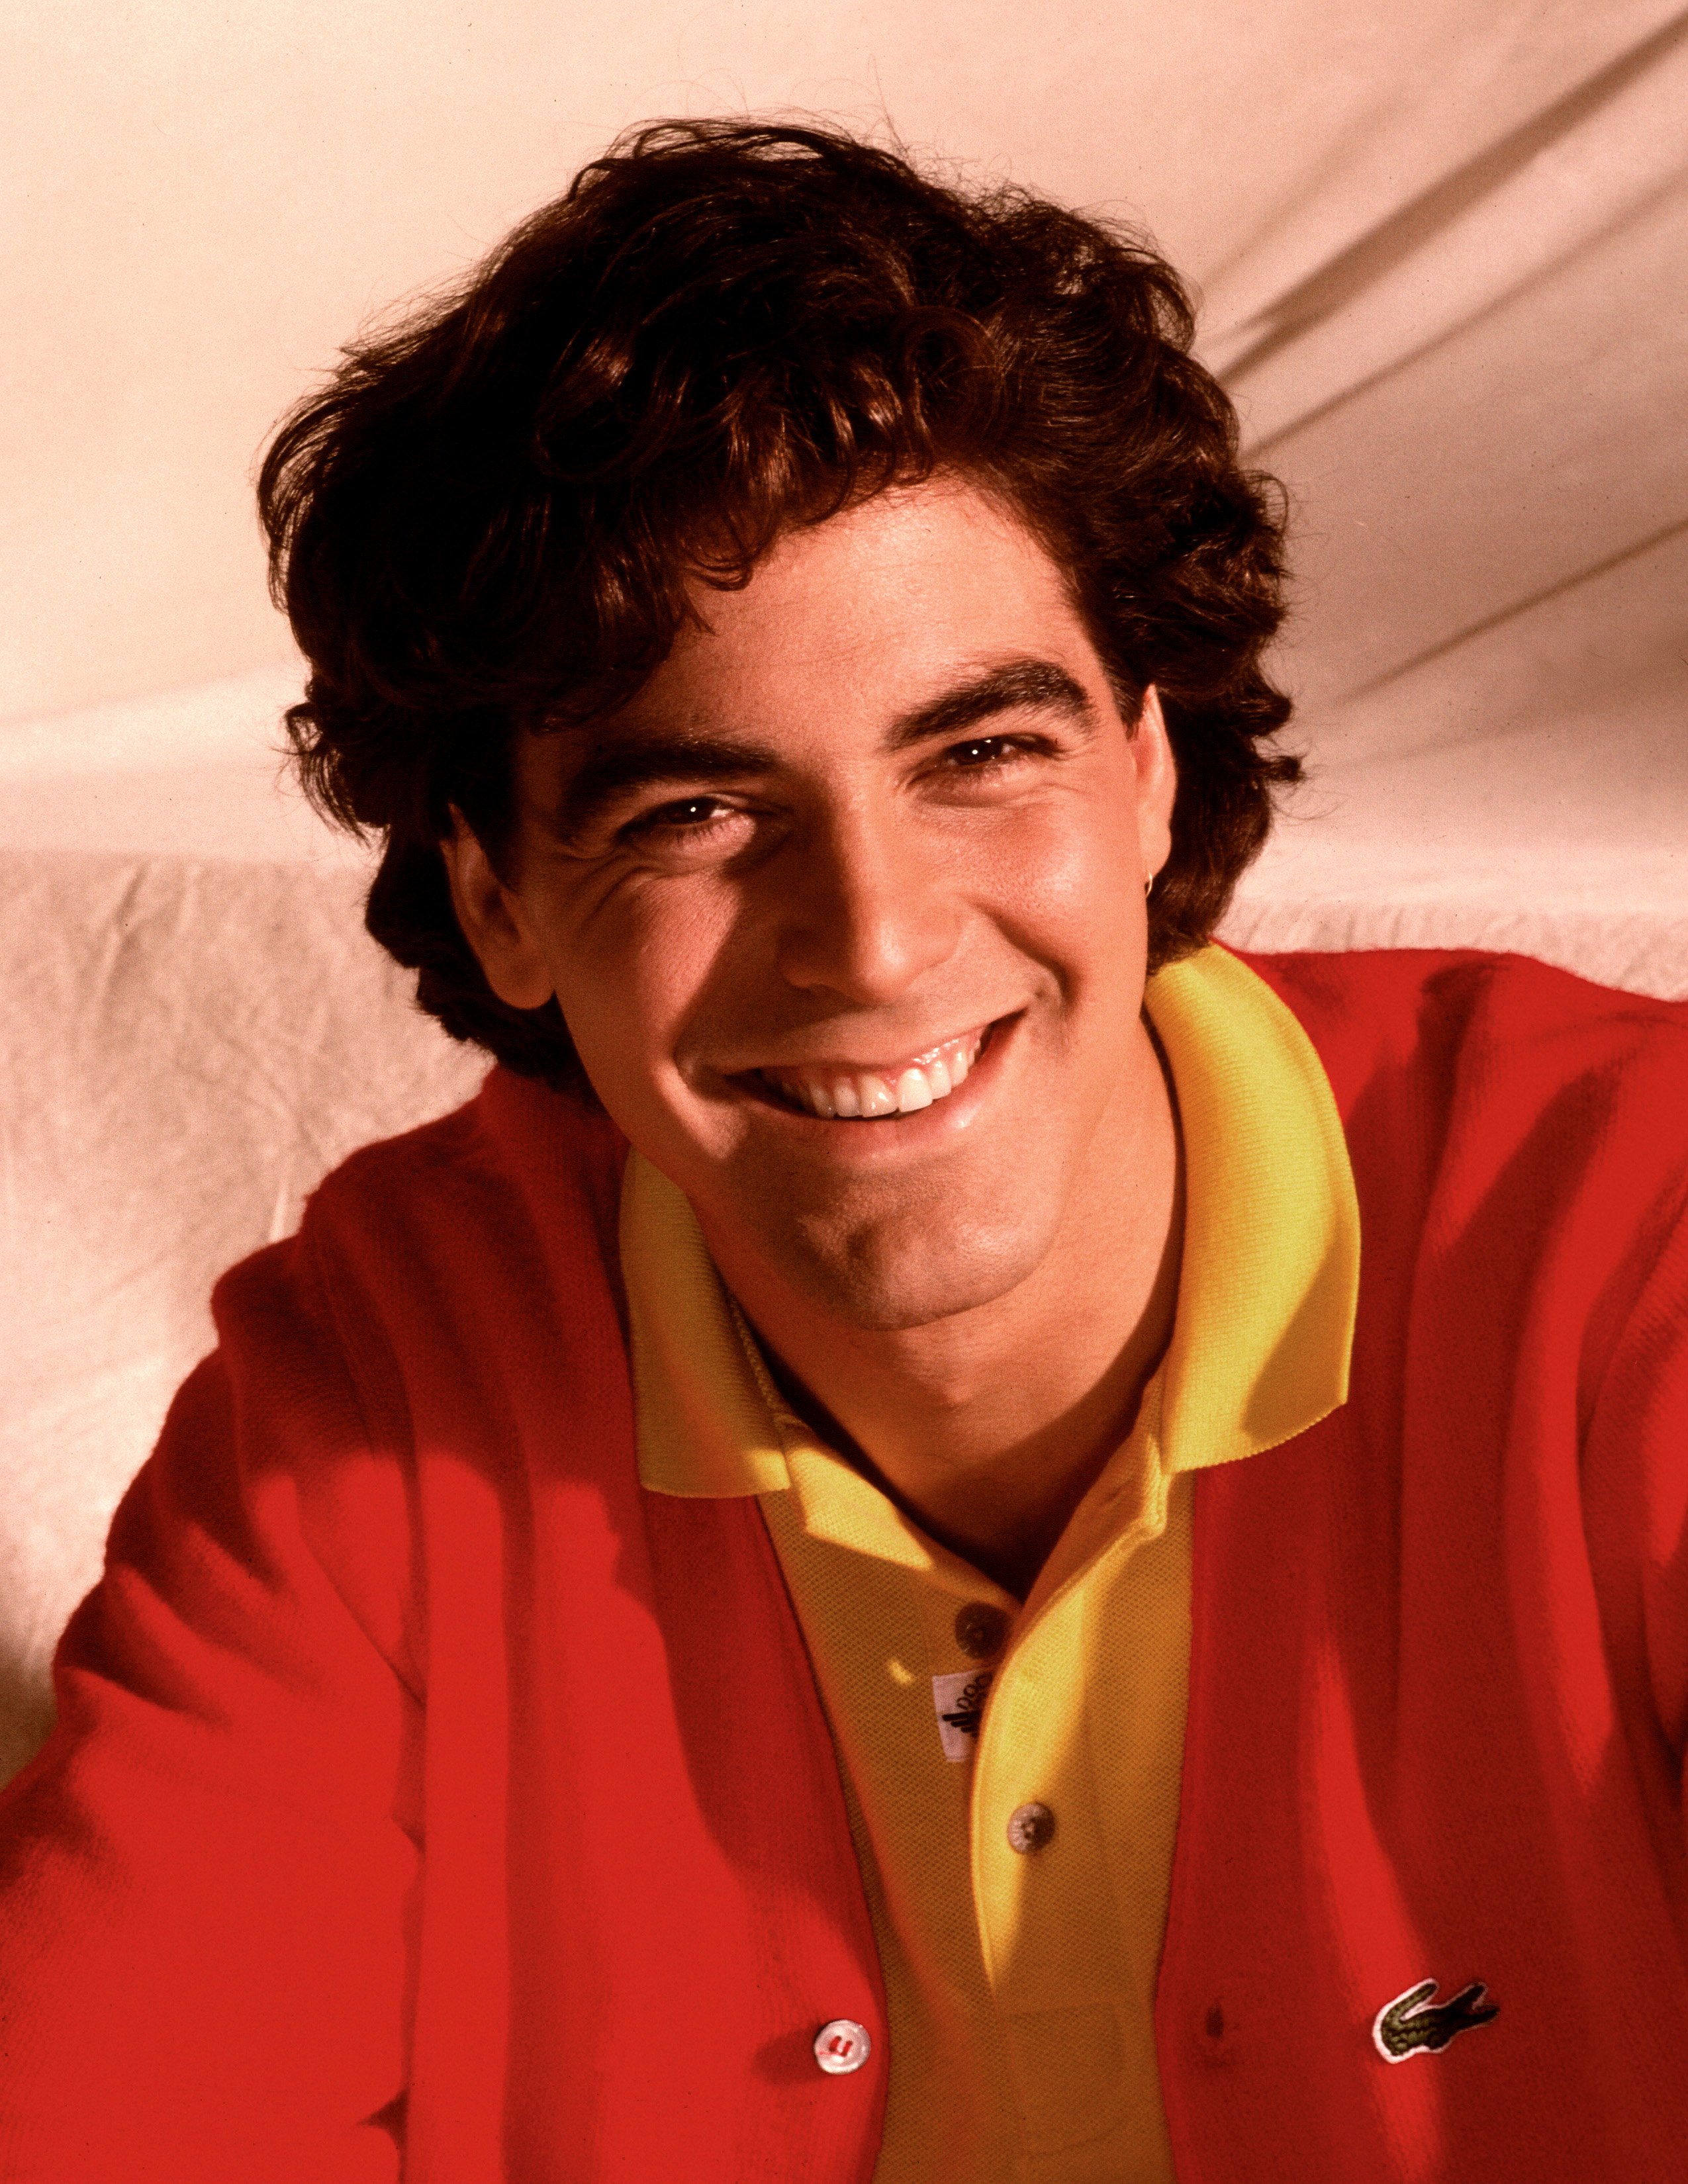 George Clooney during a portrait session on March 2, 1992, in Los Angeles, California | Source: Getty Images